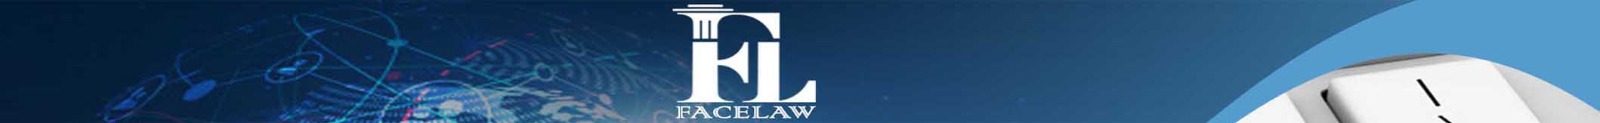 litigation lawyers in toronto